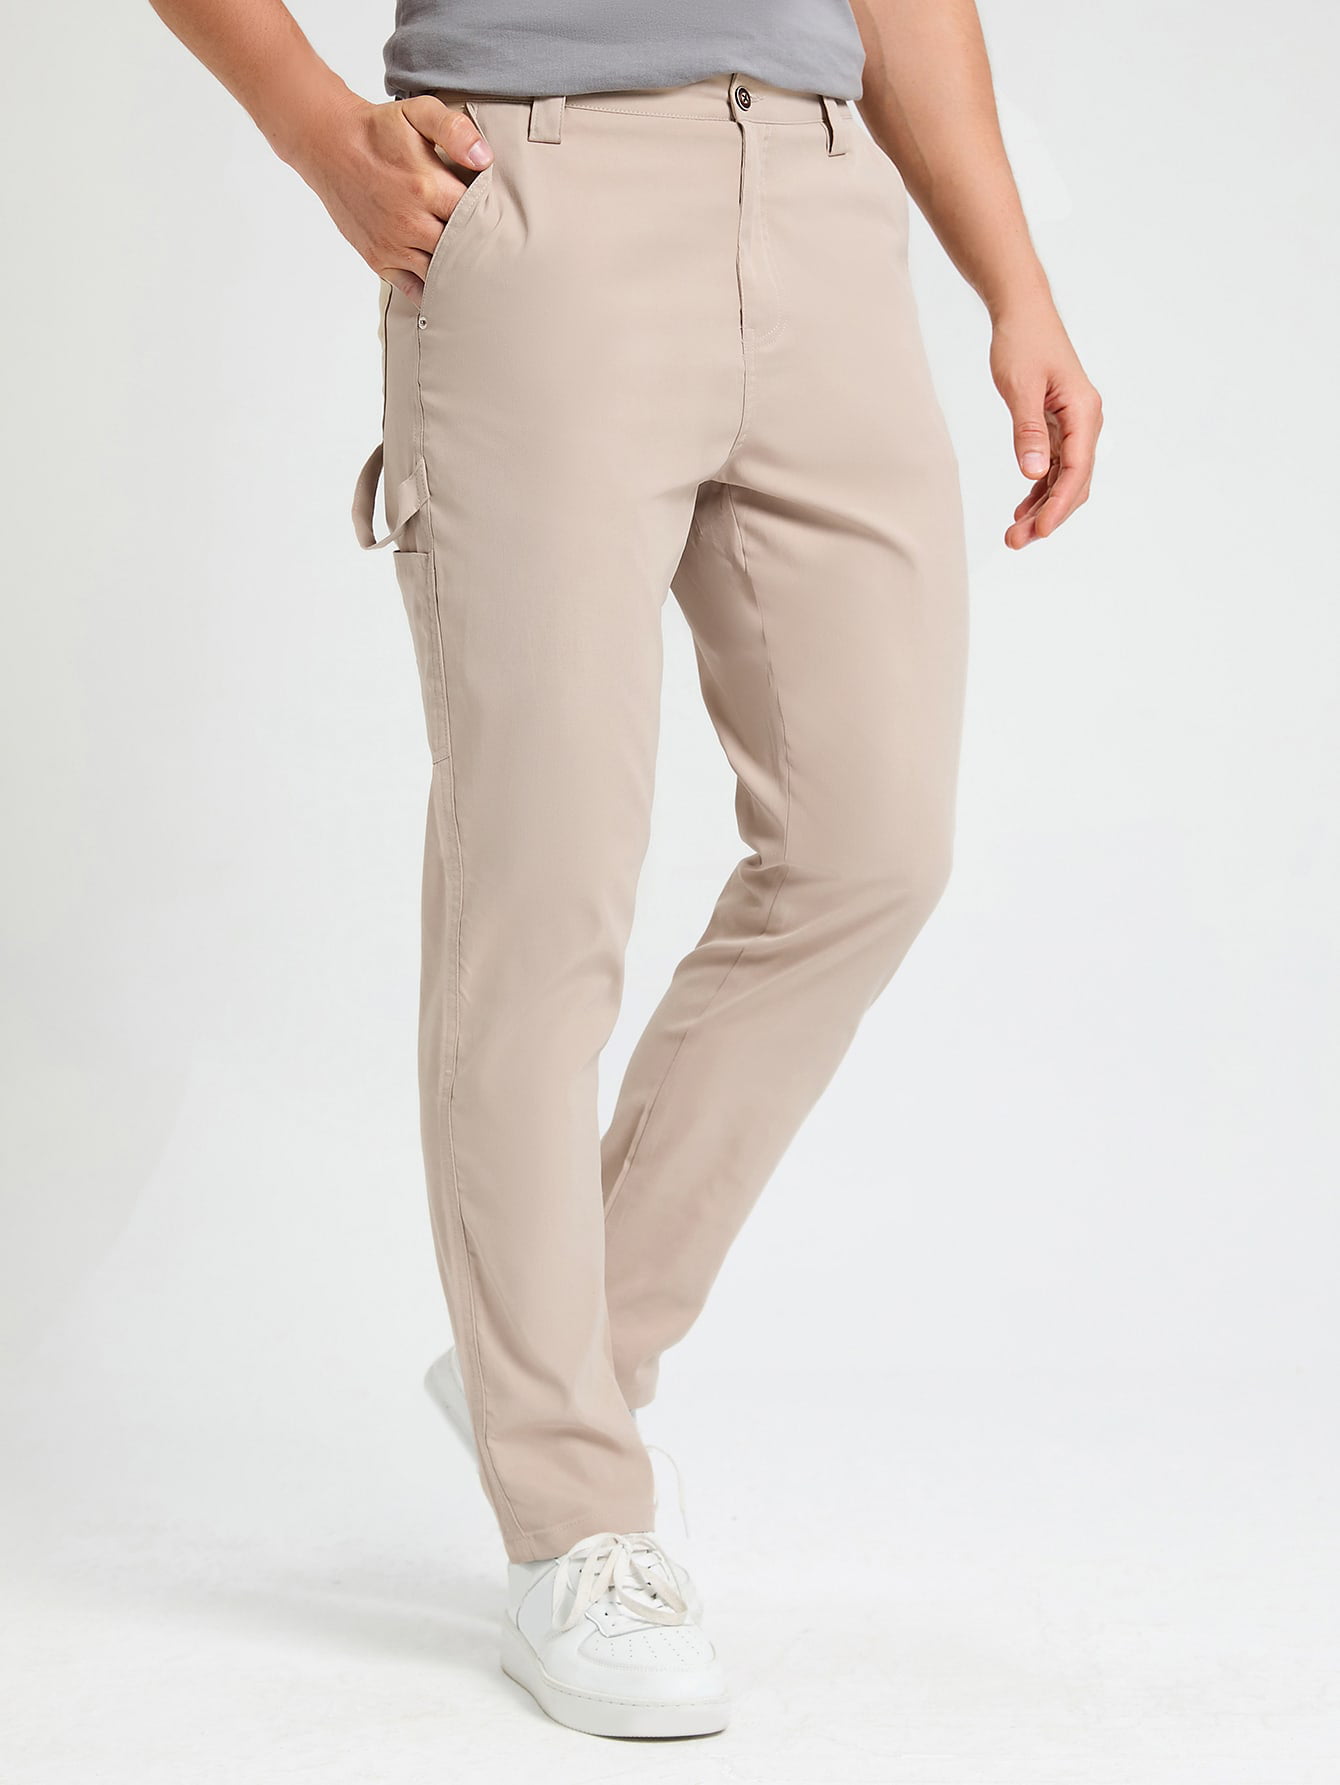 Mrz Synthetic Trouser in Sand Womens Clothing Trousers Slacks and Chinos Straight-leg trousers Natural 